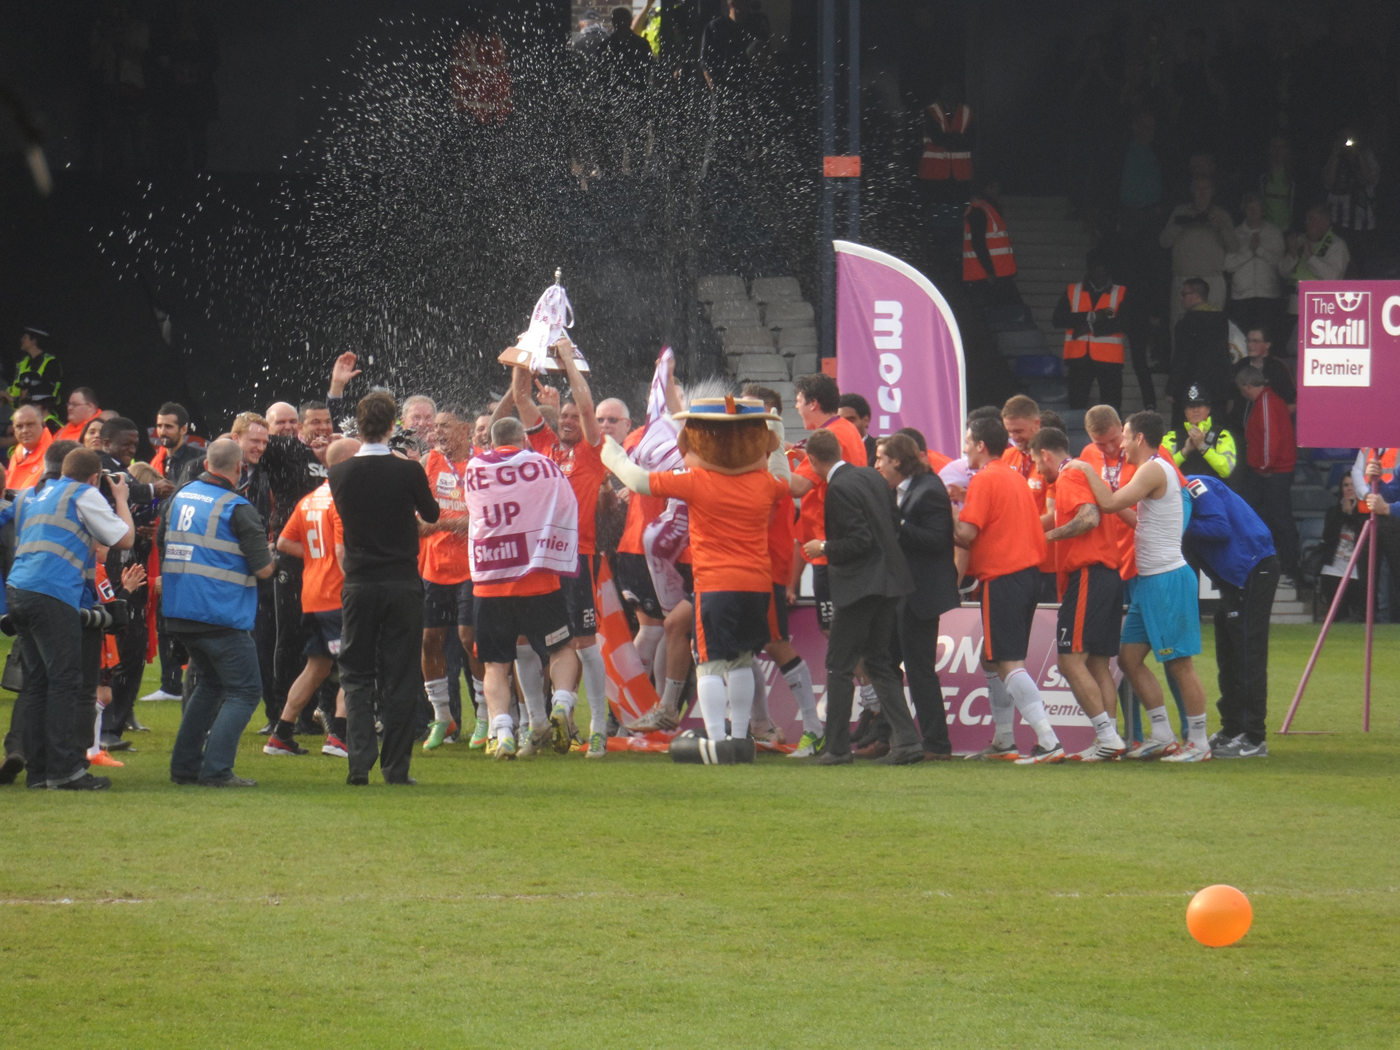 https://upload.wikimedia.org/wikipedia/commons/3/3c/Luton_Town_lift_Conference_championship_trophy_2014.jpg